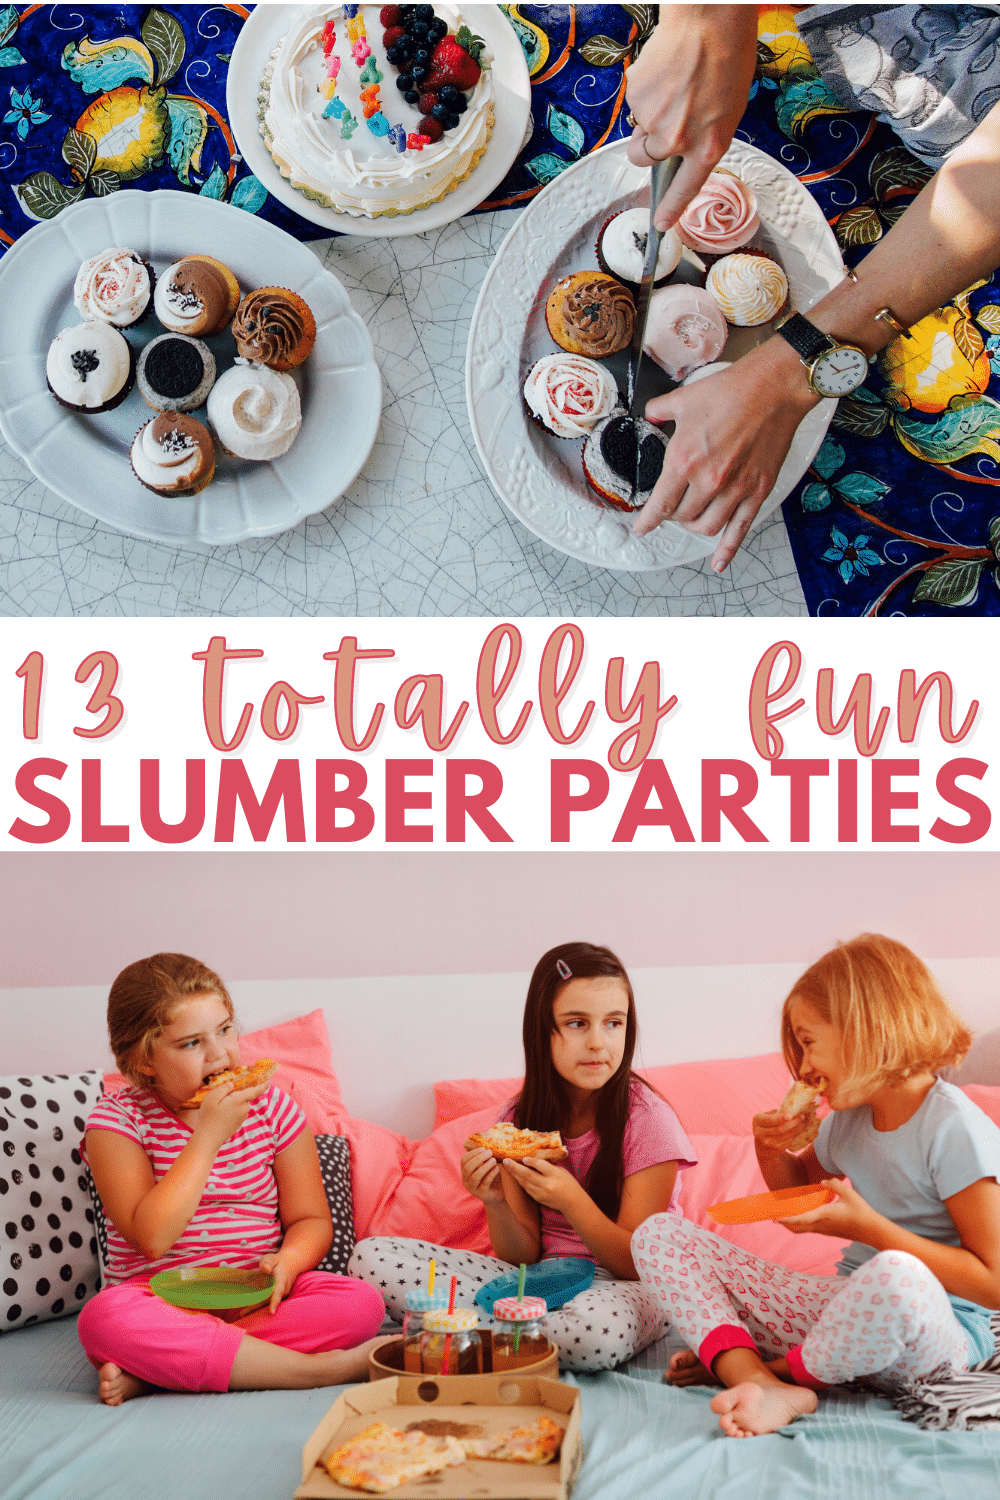 Really fun slumber party ideas to turn any sleepover into a night to remember! Choose one theme or combine several for a variety-filled evening. So many good suggestions! #sleepover #slumberparty #birthdays via @wondermomwannab